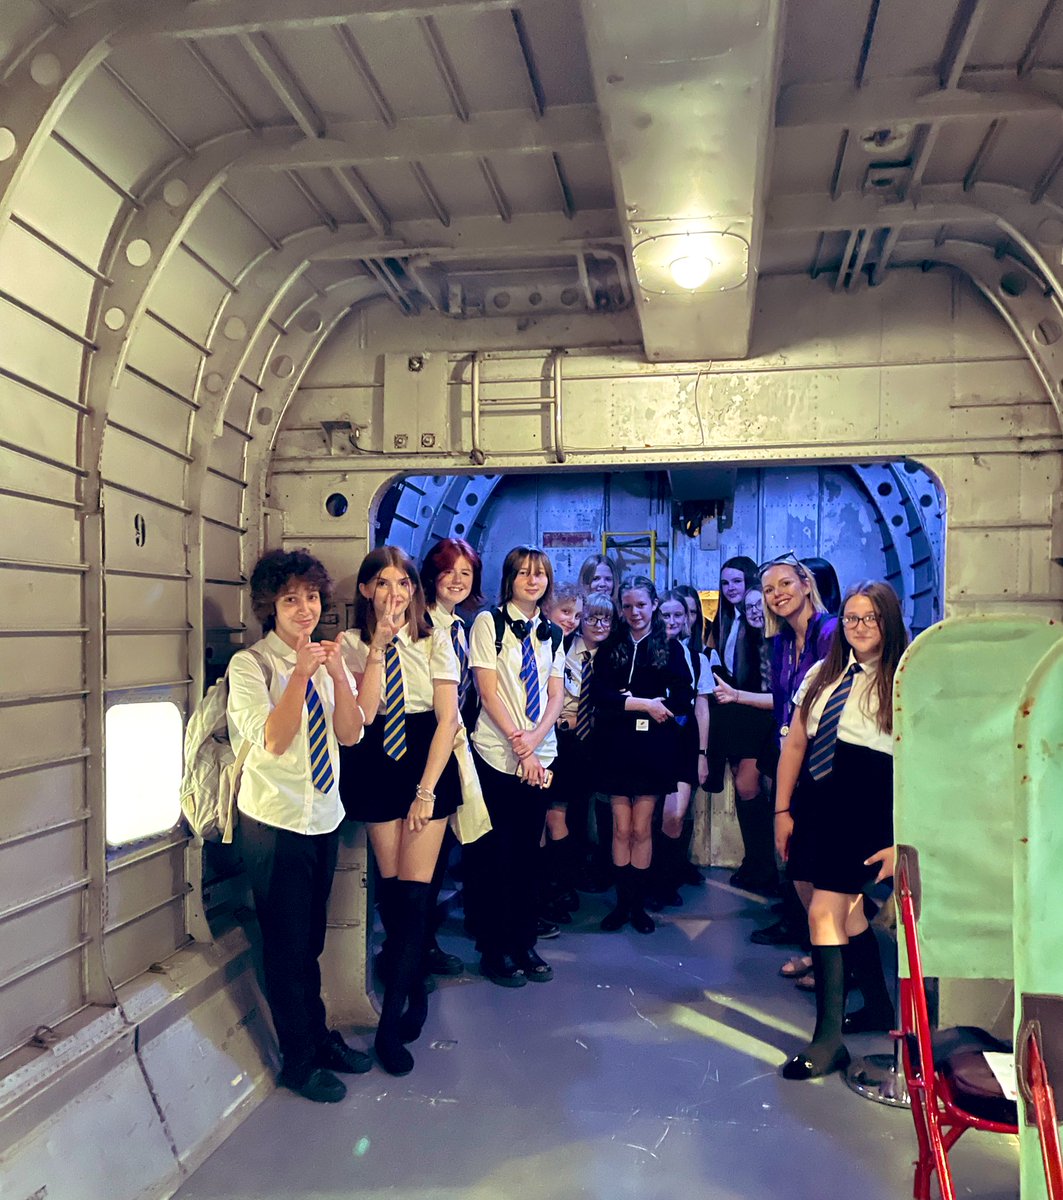 Awesome trip to #AerospaceBristol today with Yr 8&9 girls. They completed a problem solving workshop and we were lucky enough to meet an ex Concorde pilot as well as get onboard the last one to fly! ✈️ 📱 👩‍✈️ #GirlsInTech #GirlsInStem #DCF #DigitalSkills @CaldicotDcf @EAS_Digital